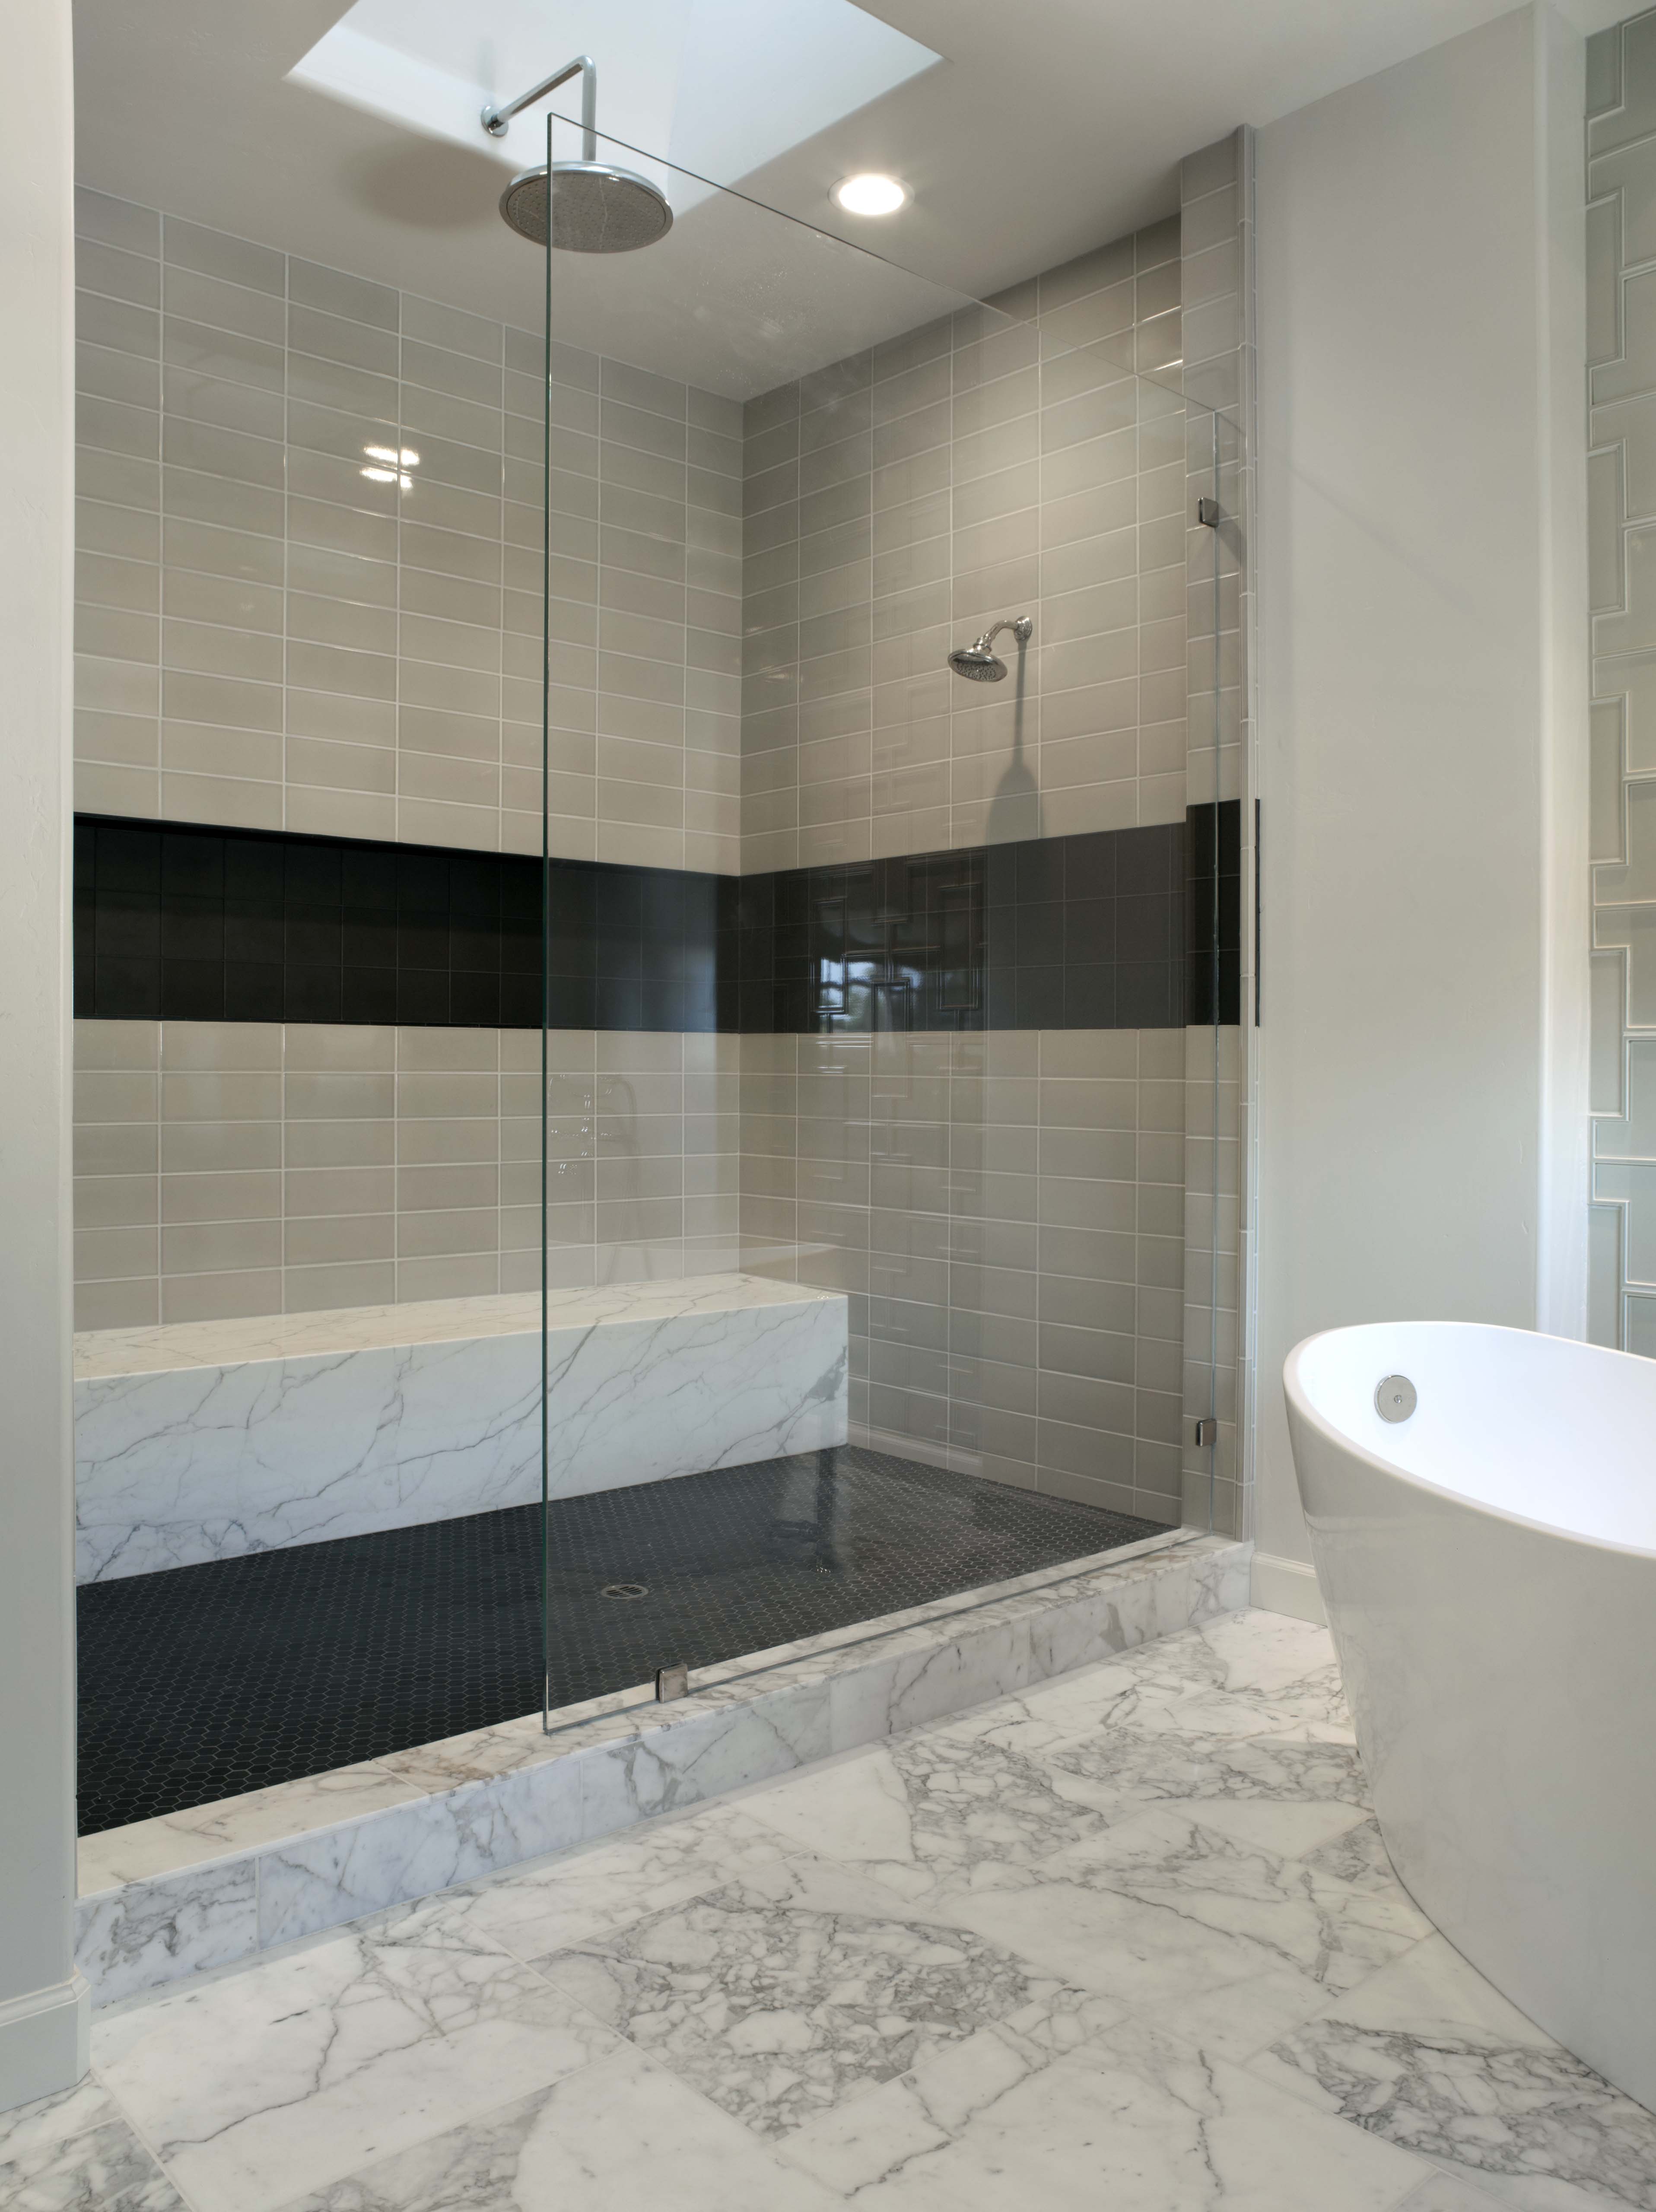 bathroom-inspiration-delightful-soaking-white-porcelain-tub-as-well-as-gray-subway-tile-wall-stand-up-shower-cubicle-with-glass-divider-bath-in-modern-black-and-white-bathroom-decor-plans-20-exceptio